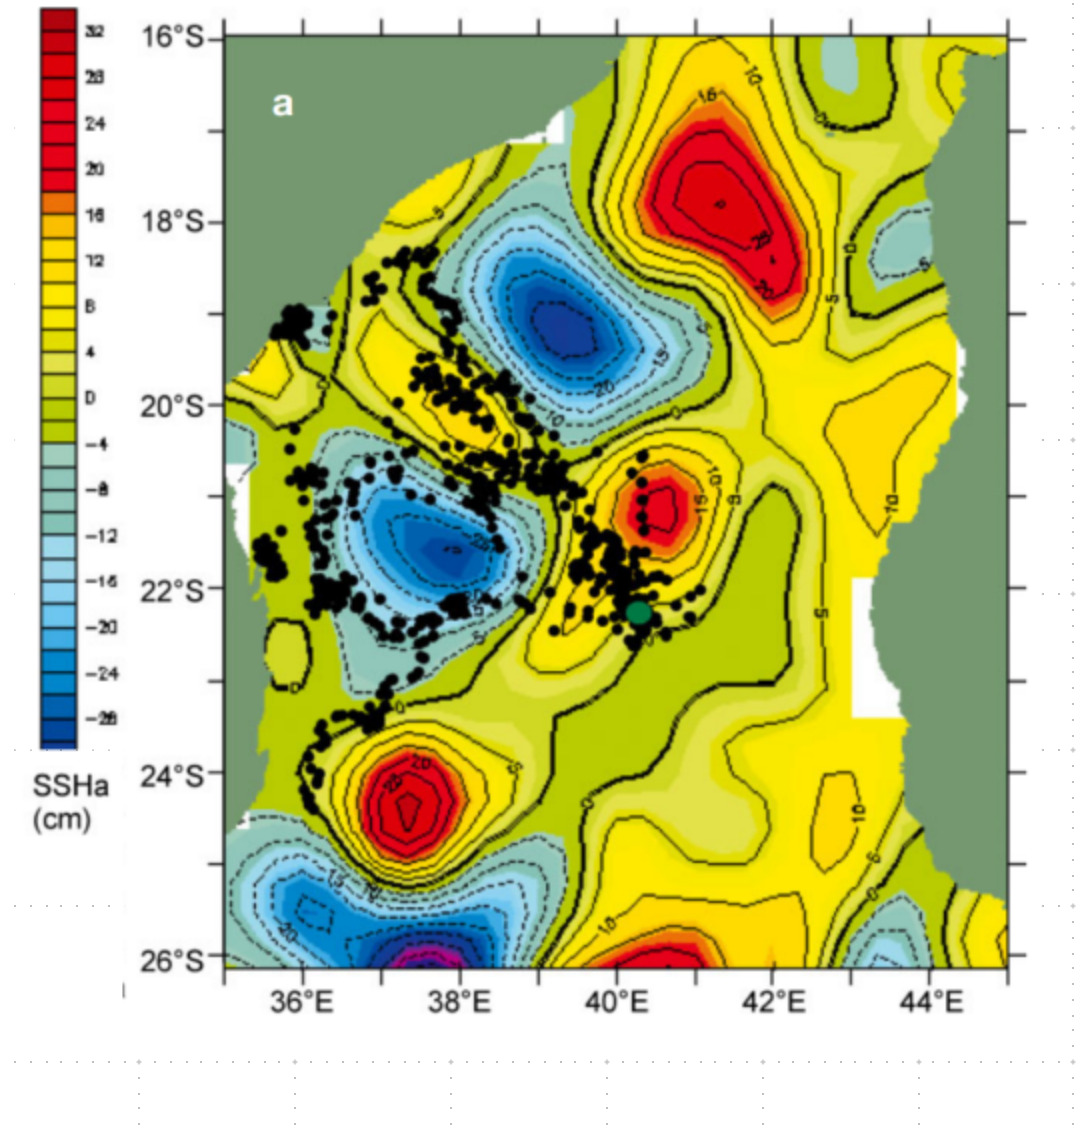 Figure 4: Example of bio-physical coupling between seabirds and eddies. The displacements of frigates, observed by bio-logging (black dots), are compared to the presence of cyclonic eddies (negative anomalies, in blue) and anticyclonic eddies (positive anomalies, in red) detected by satellite altimetry. (Weimerskirch et al., 2004)